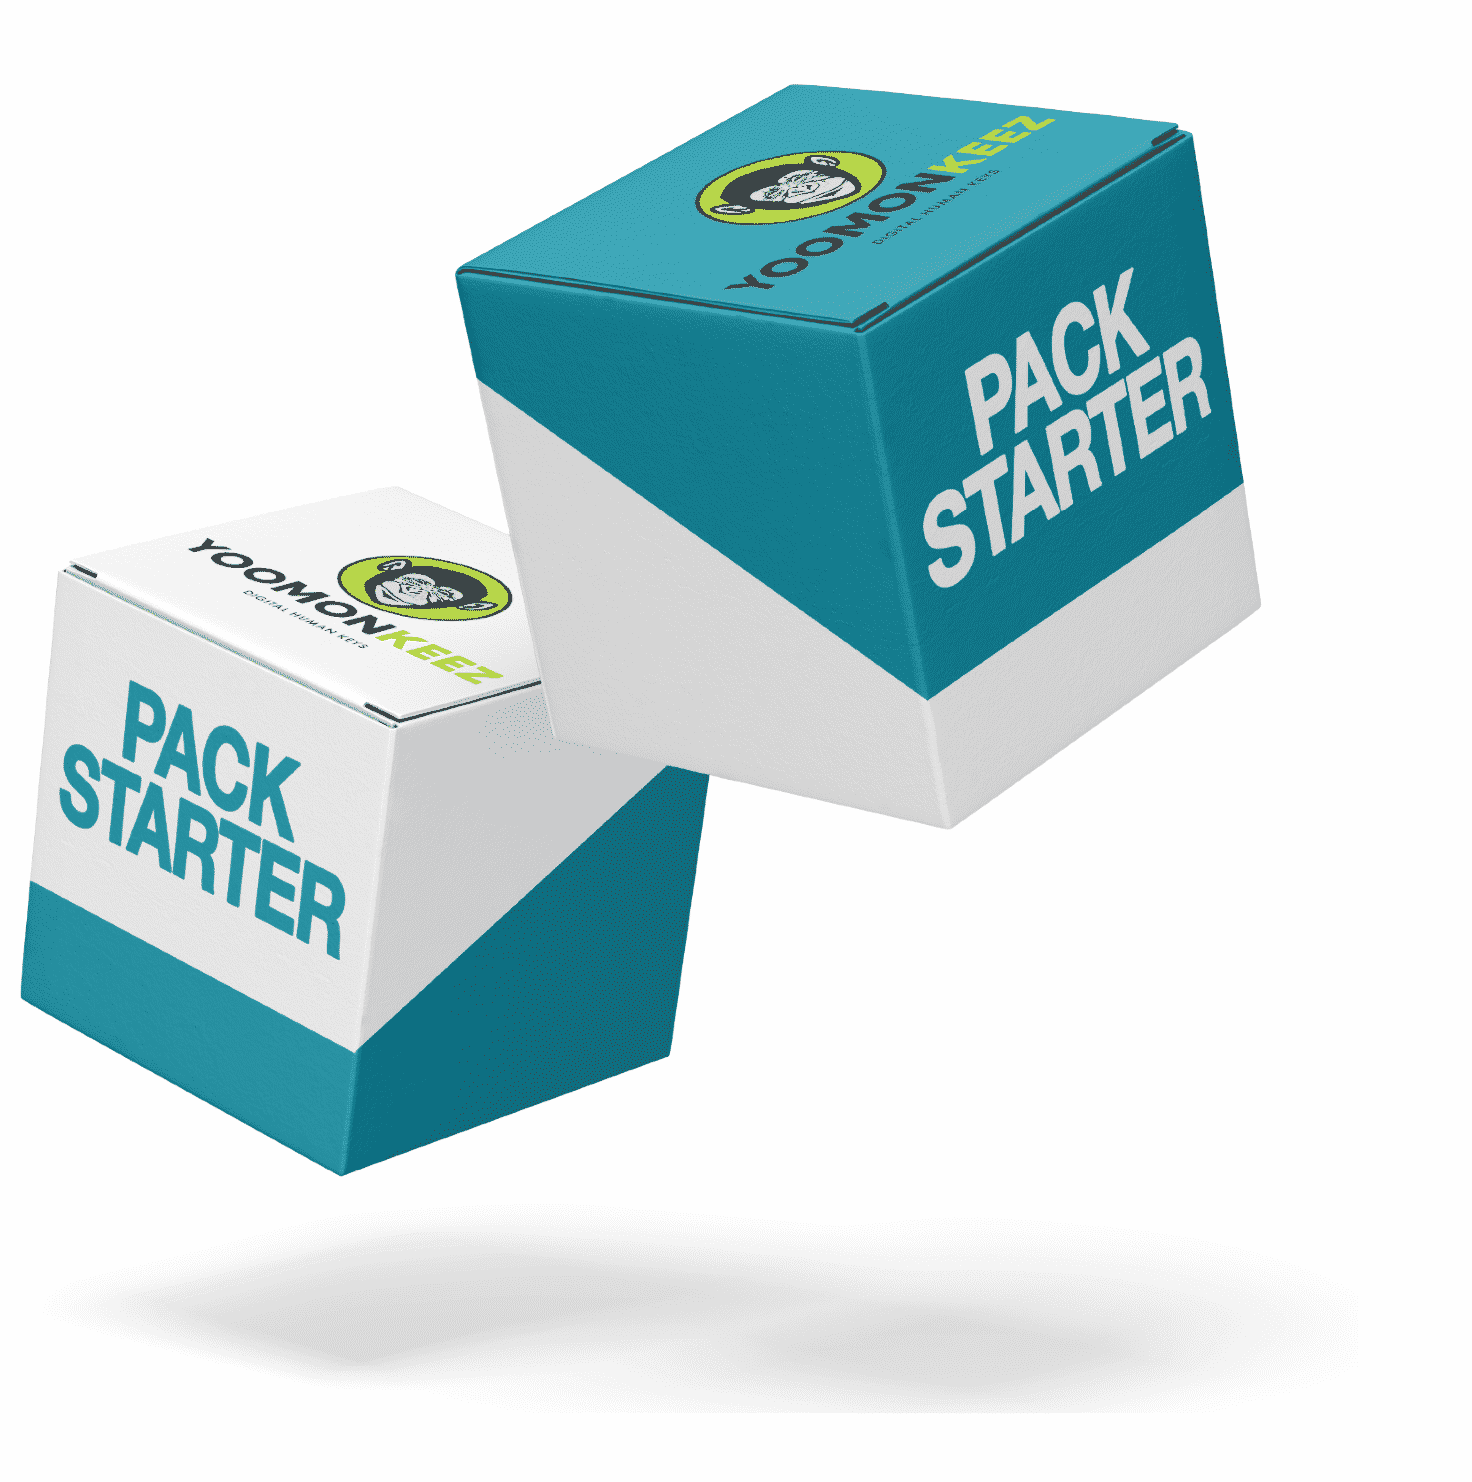 Pack Starter Microlearning